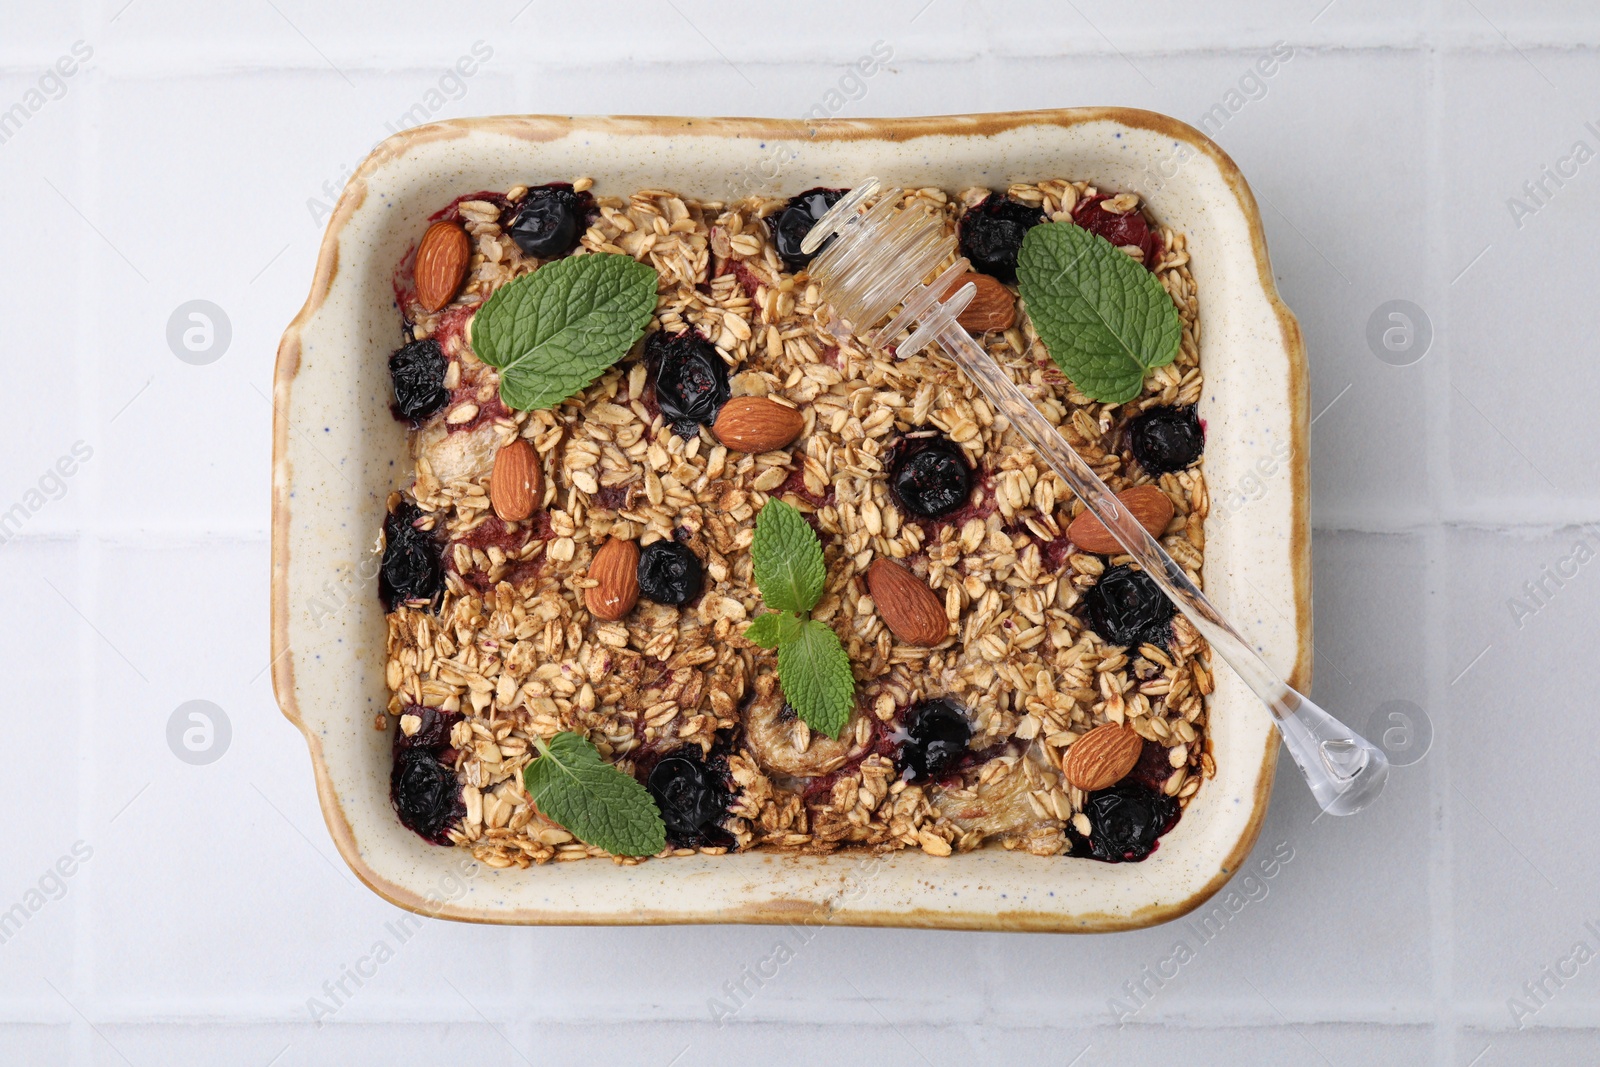 Photo of Tasty baked oatmeal with berries, almonds and honey dipper in baking tray on white tiled table, top view